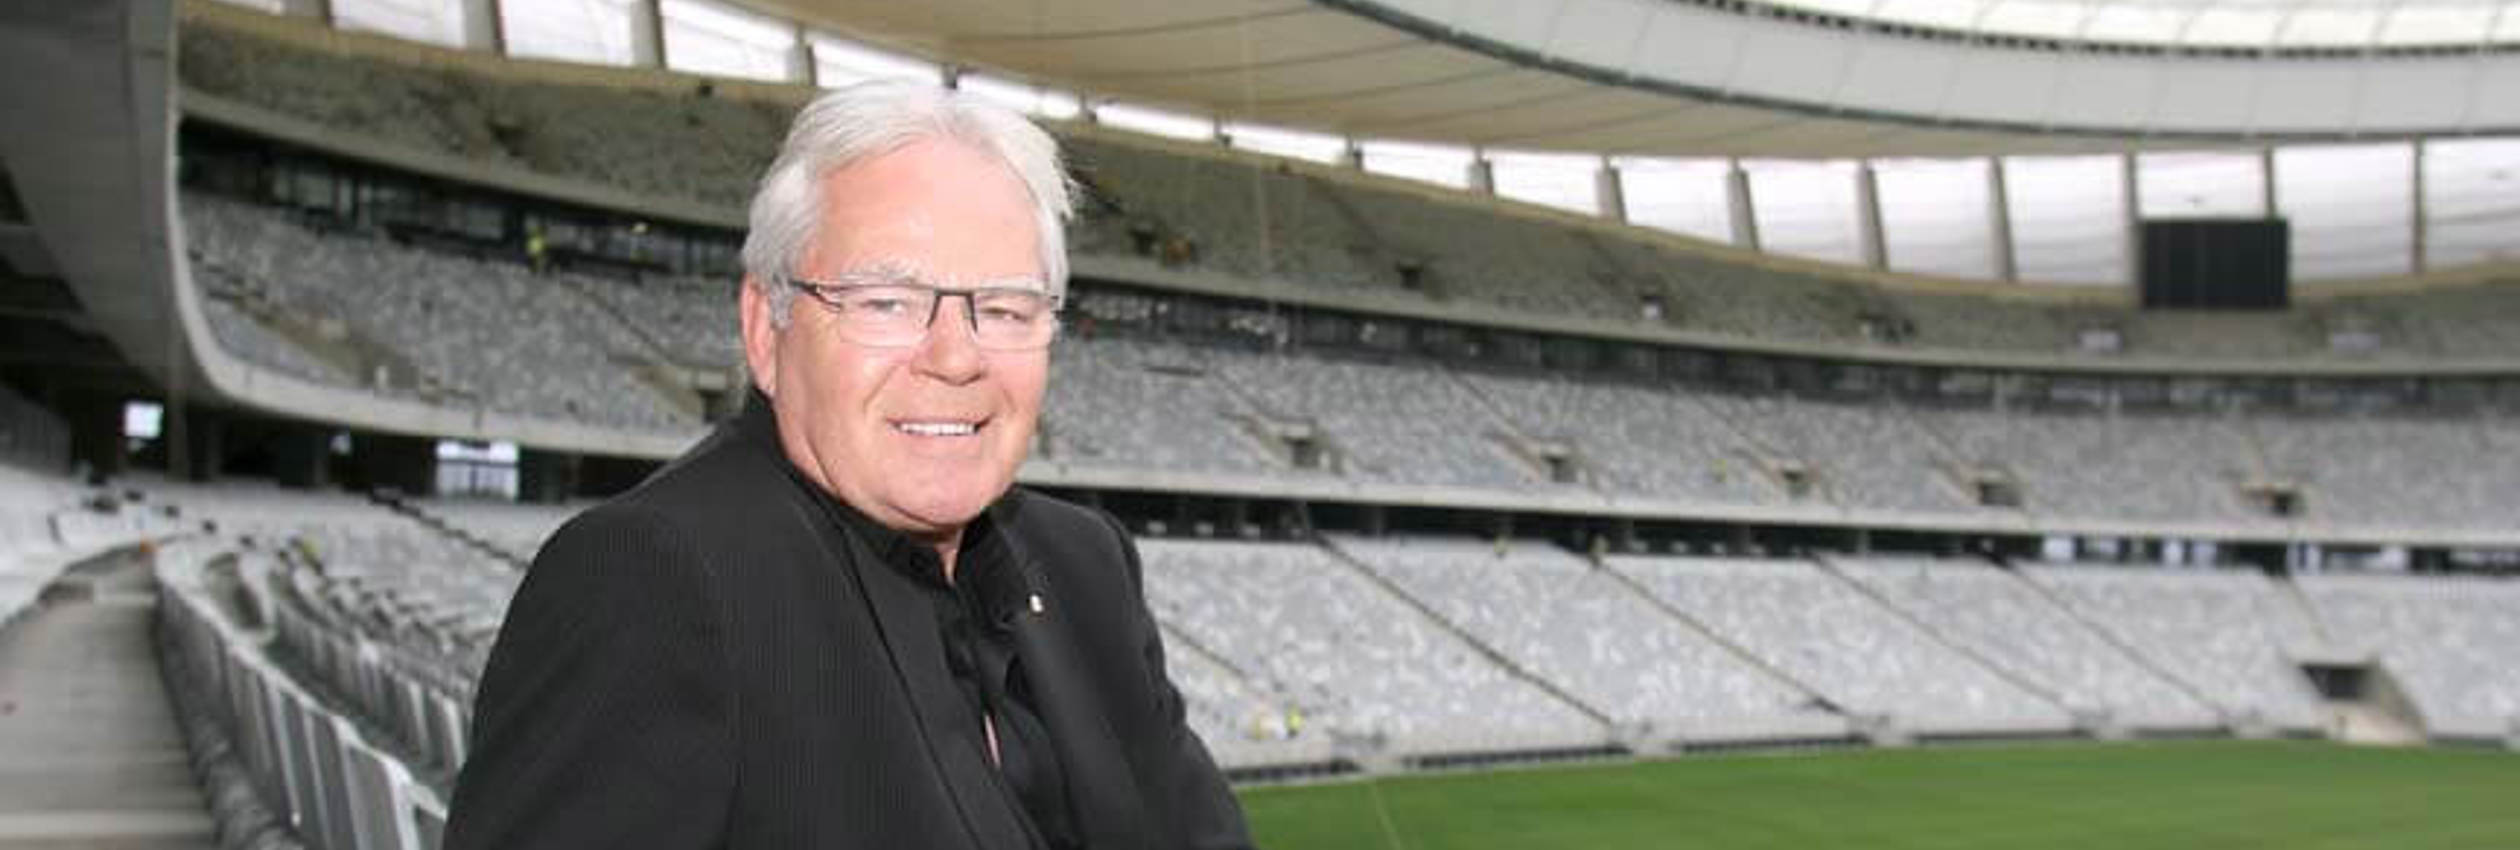 SBS announcer Les Murray sits in the grandstand at the World Cup in South Africa